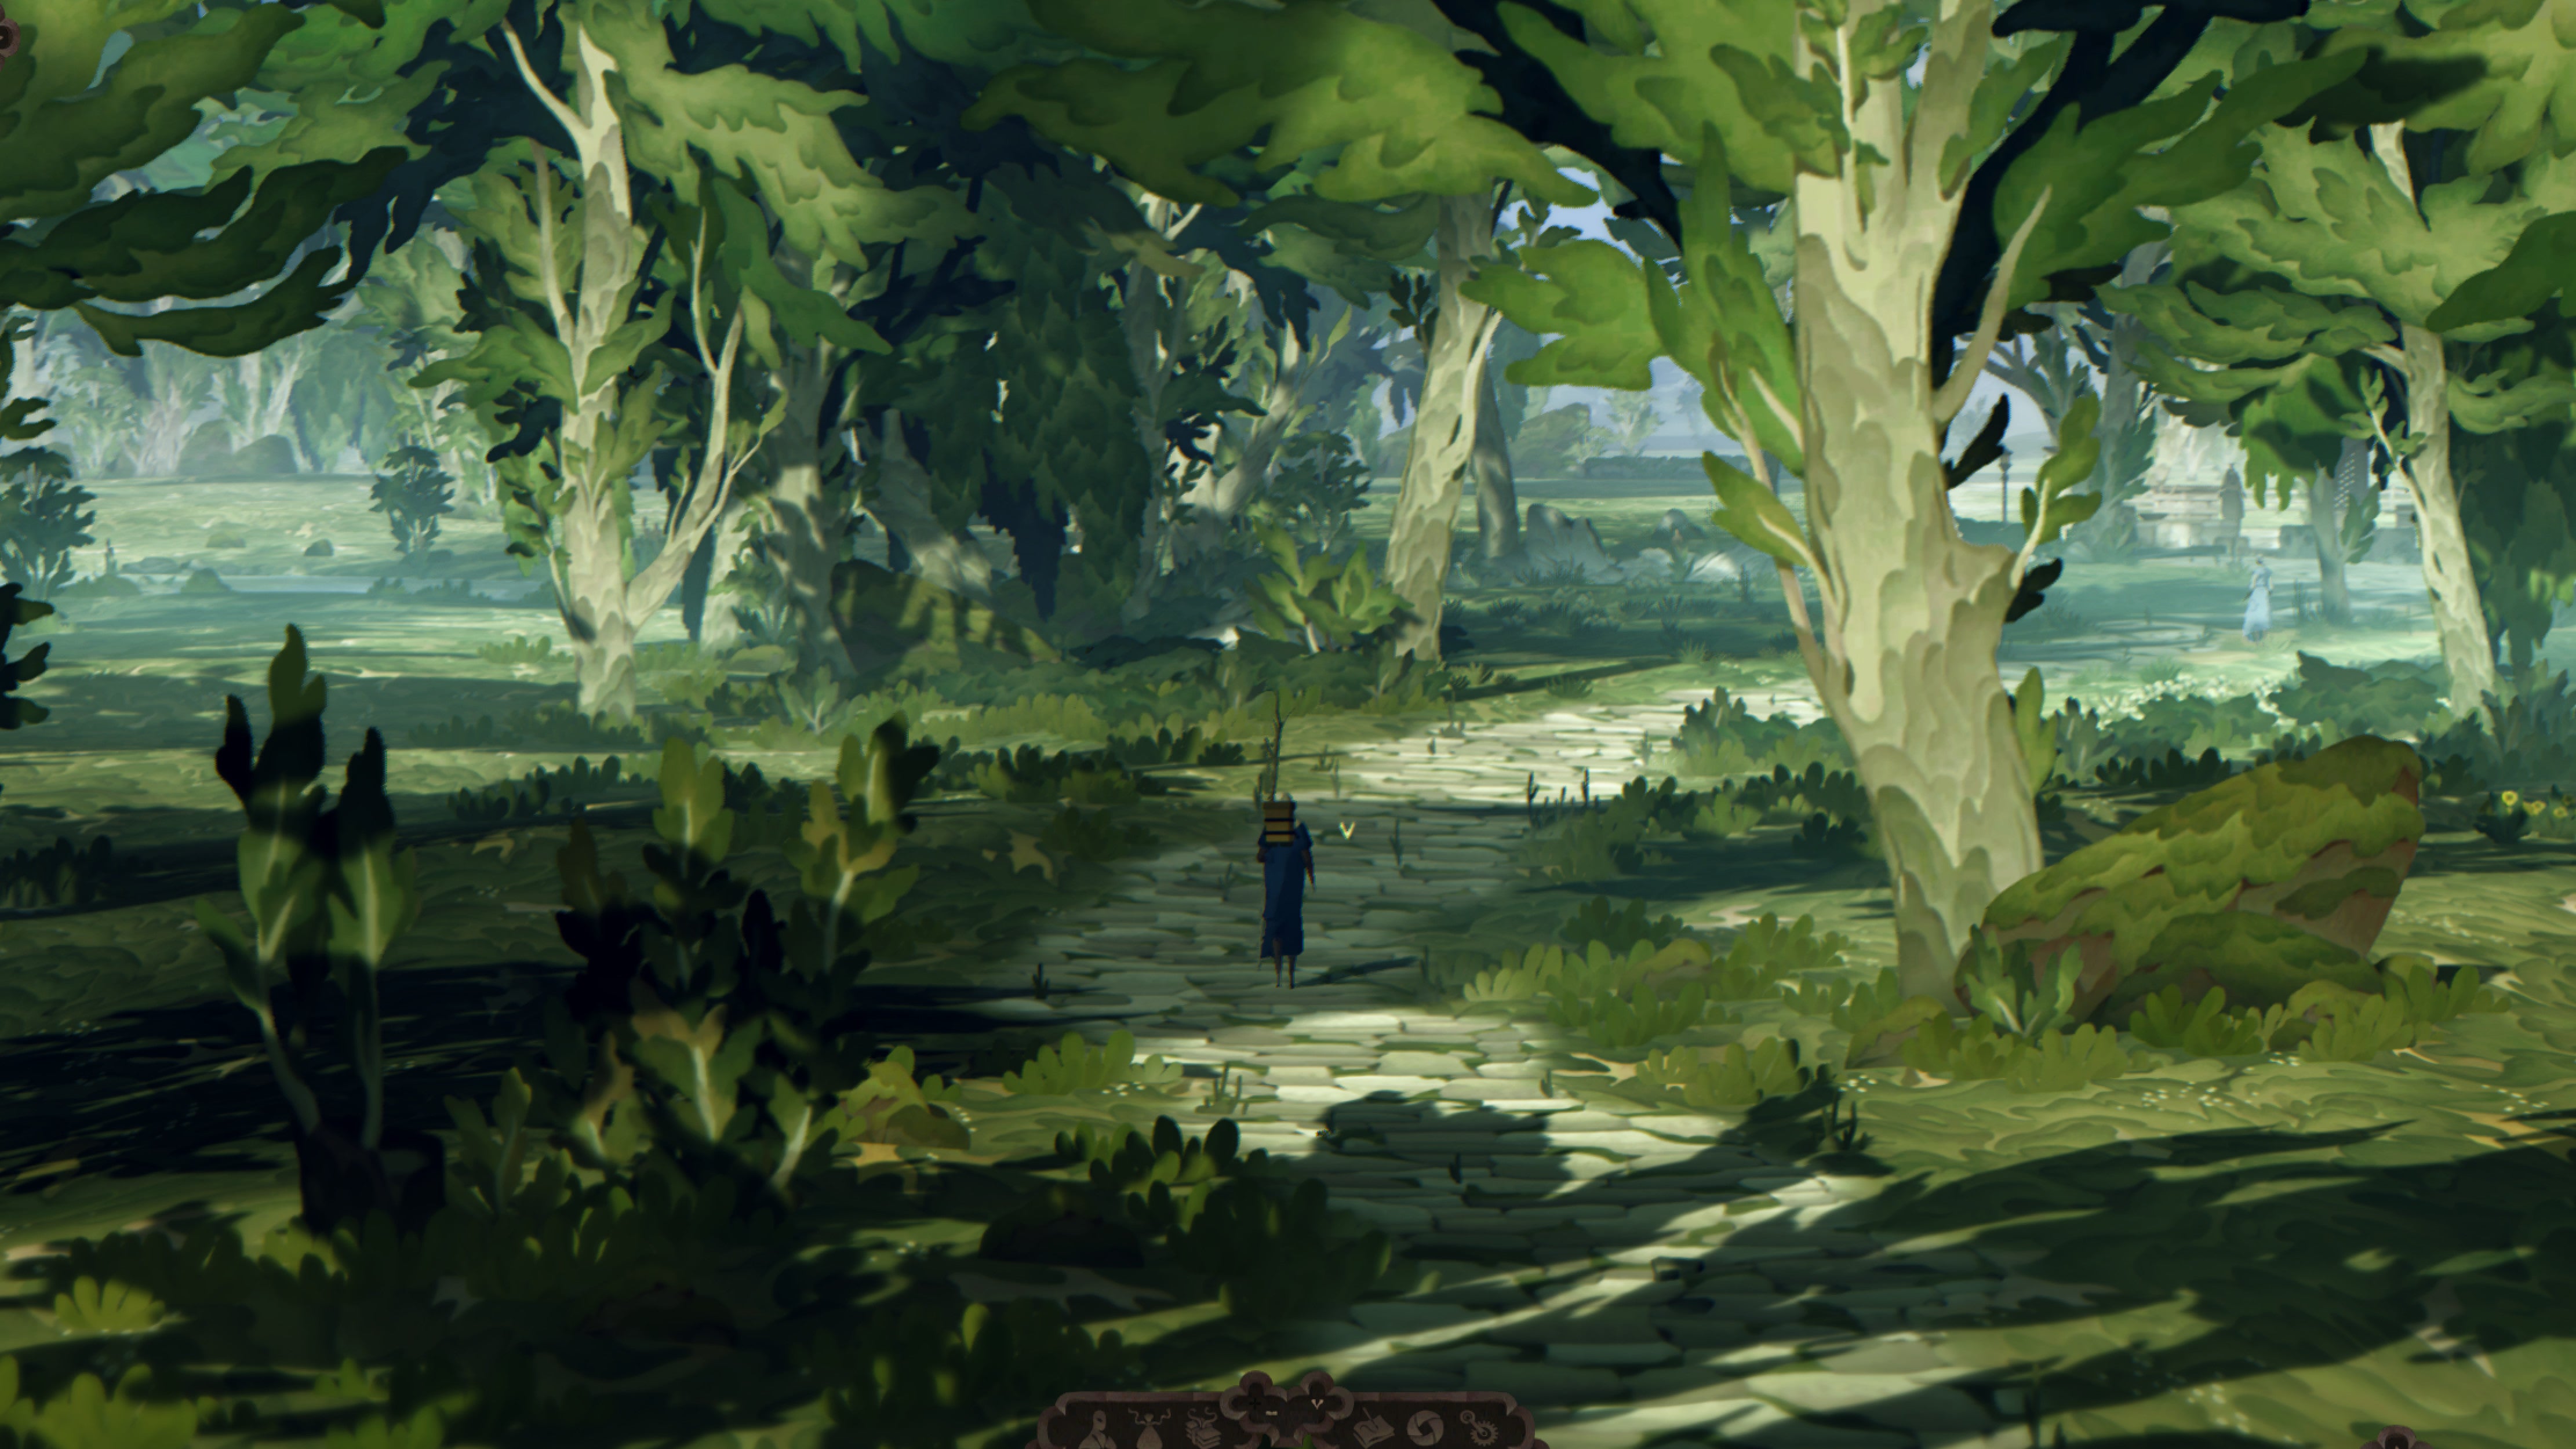 Book Of Travels - a player in a blue robe walks alone with a walking stick and backpack along a quiet road through a forest